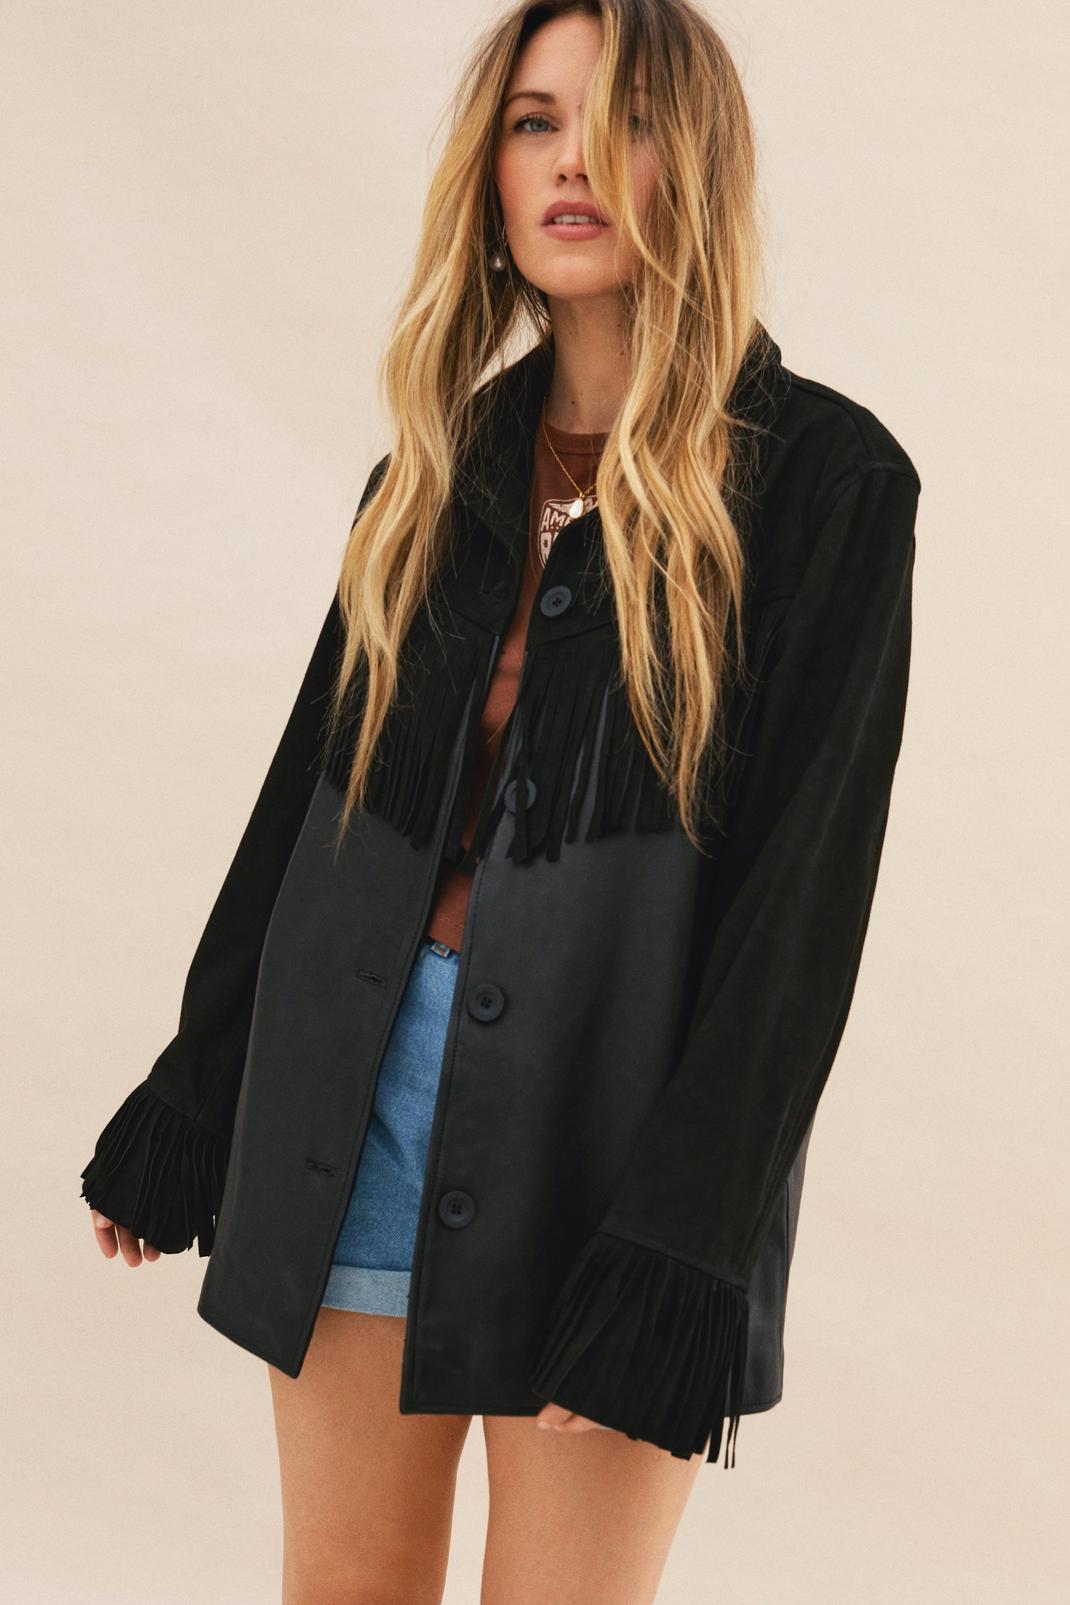 Real Leather and Suede Fringe Jacket